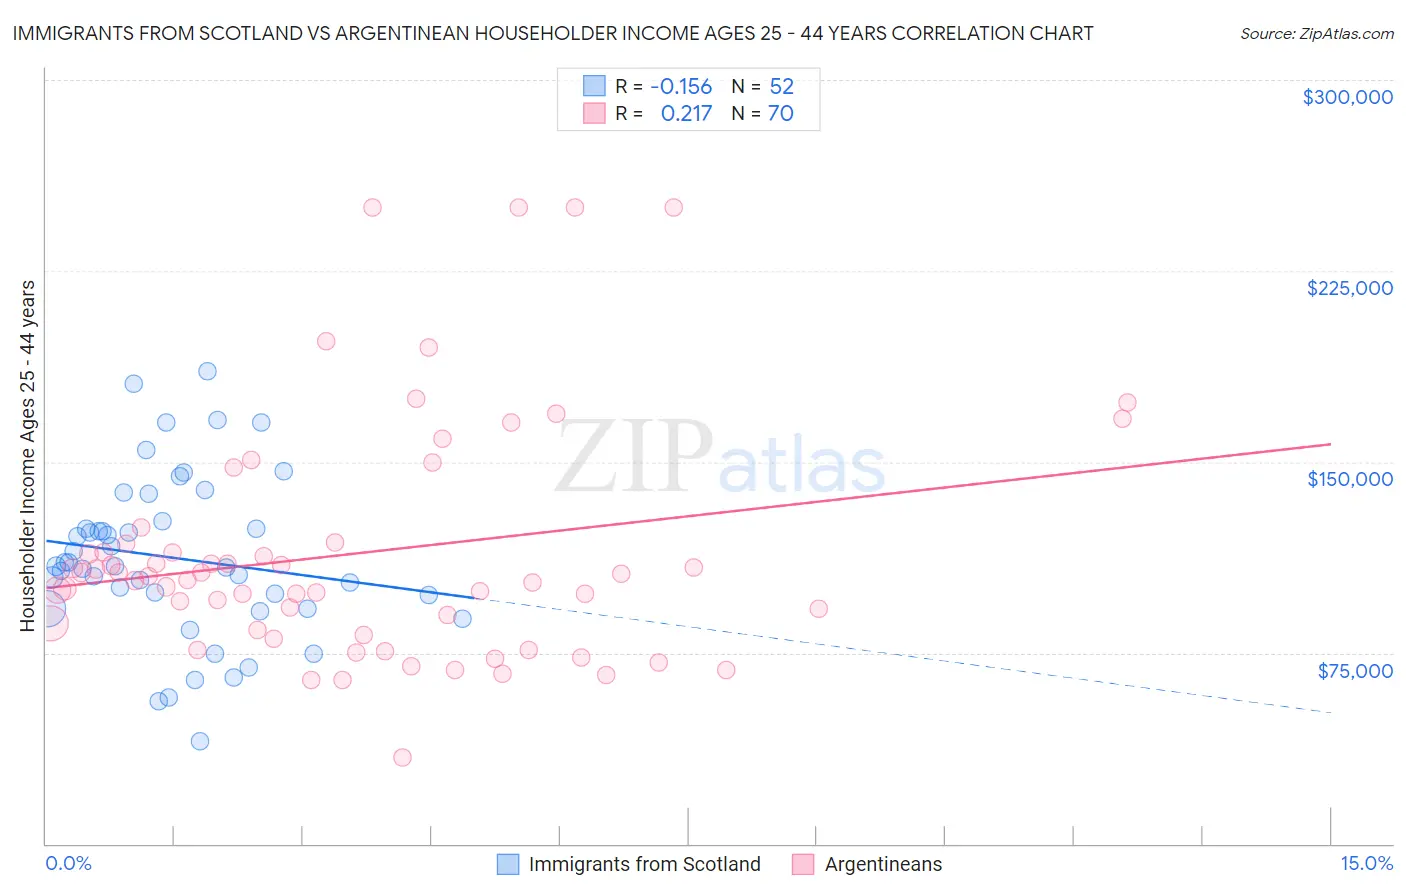 Immigrants from Scotland vs Argentinean Householder Income Ages 25 - 44 years